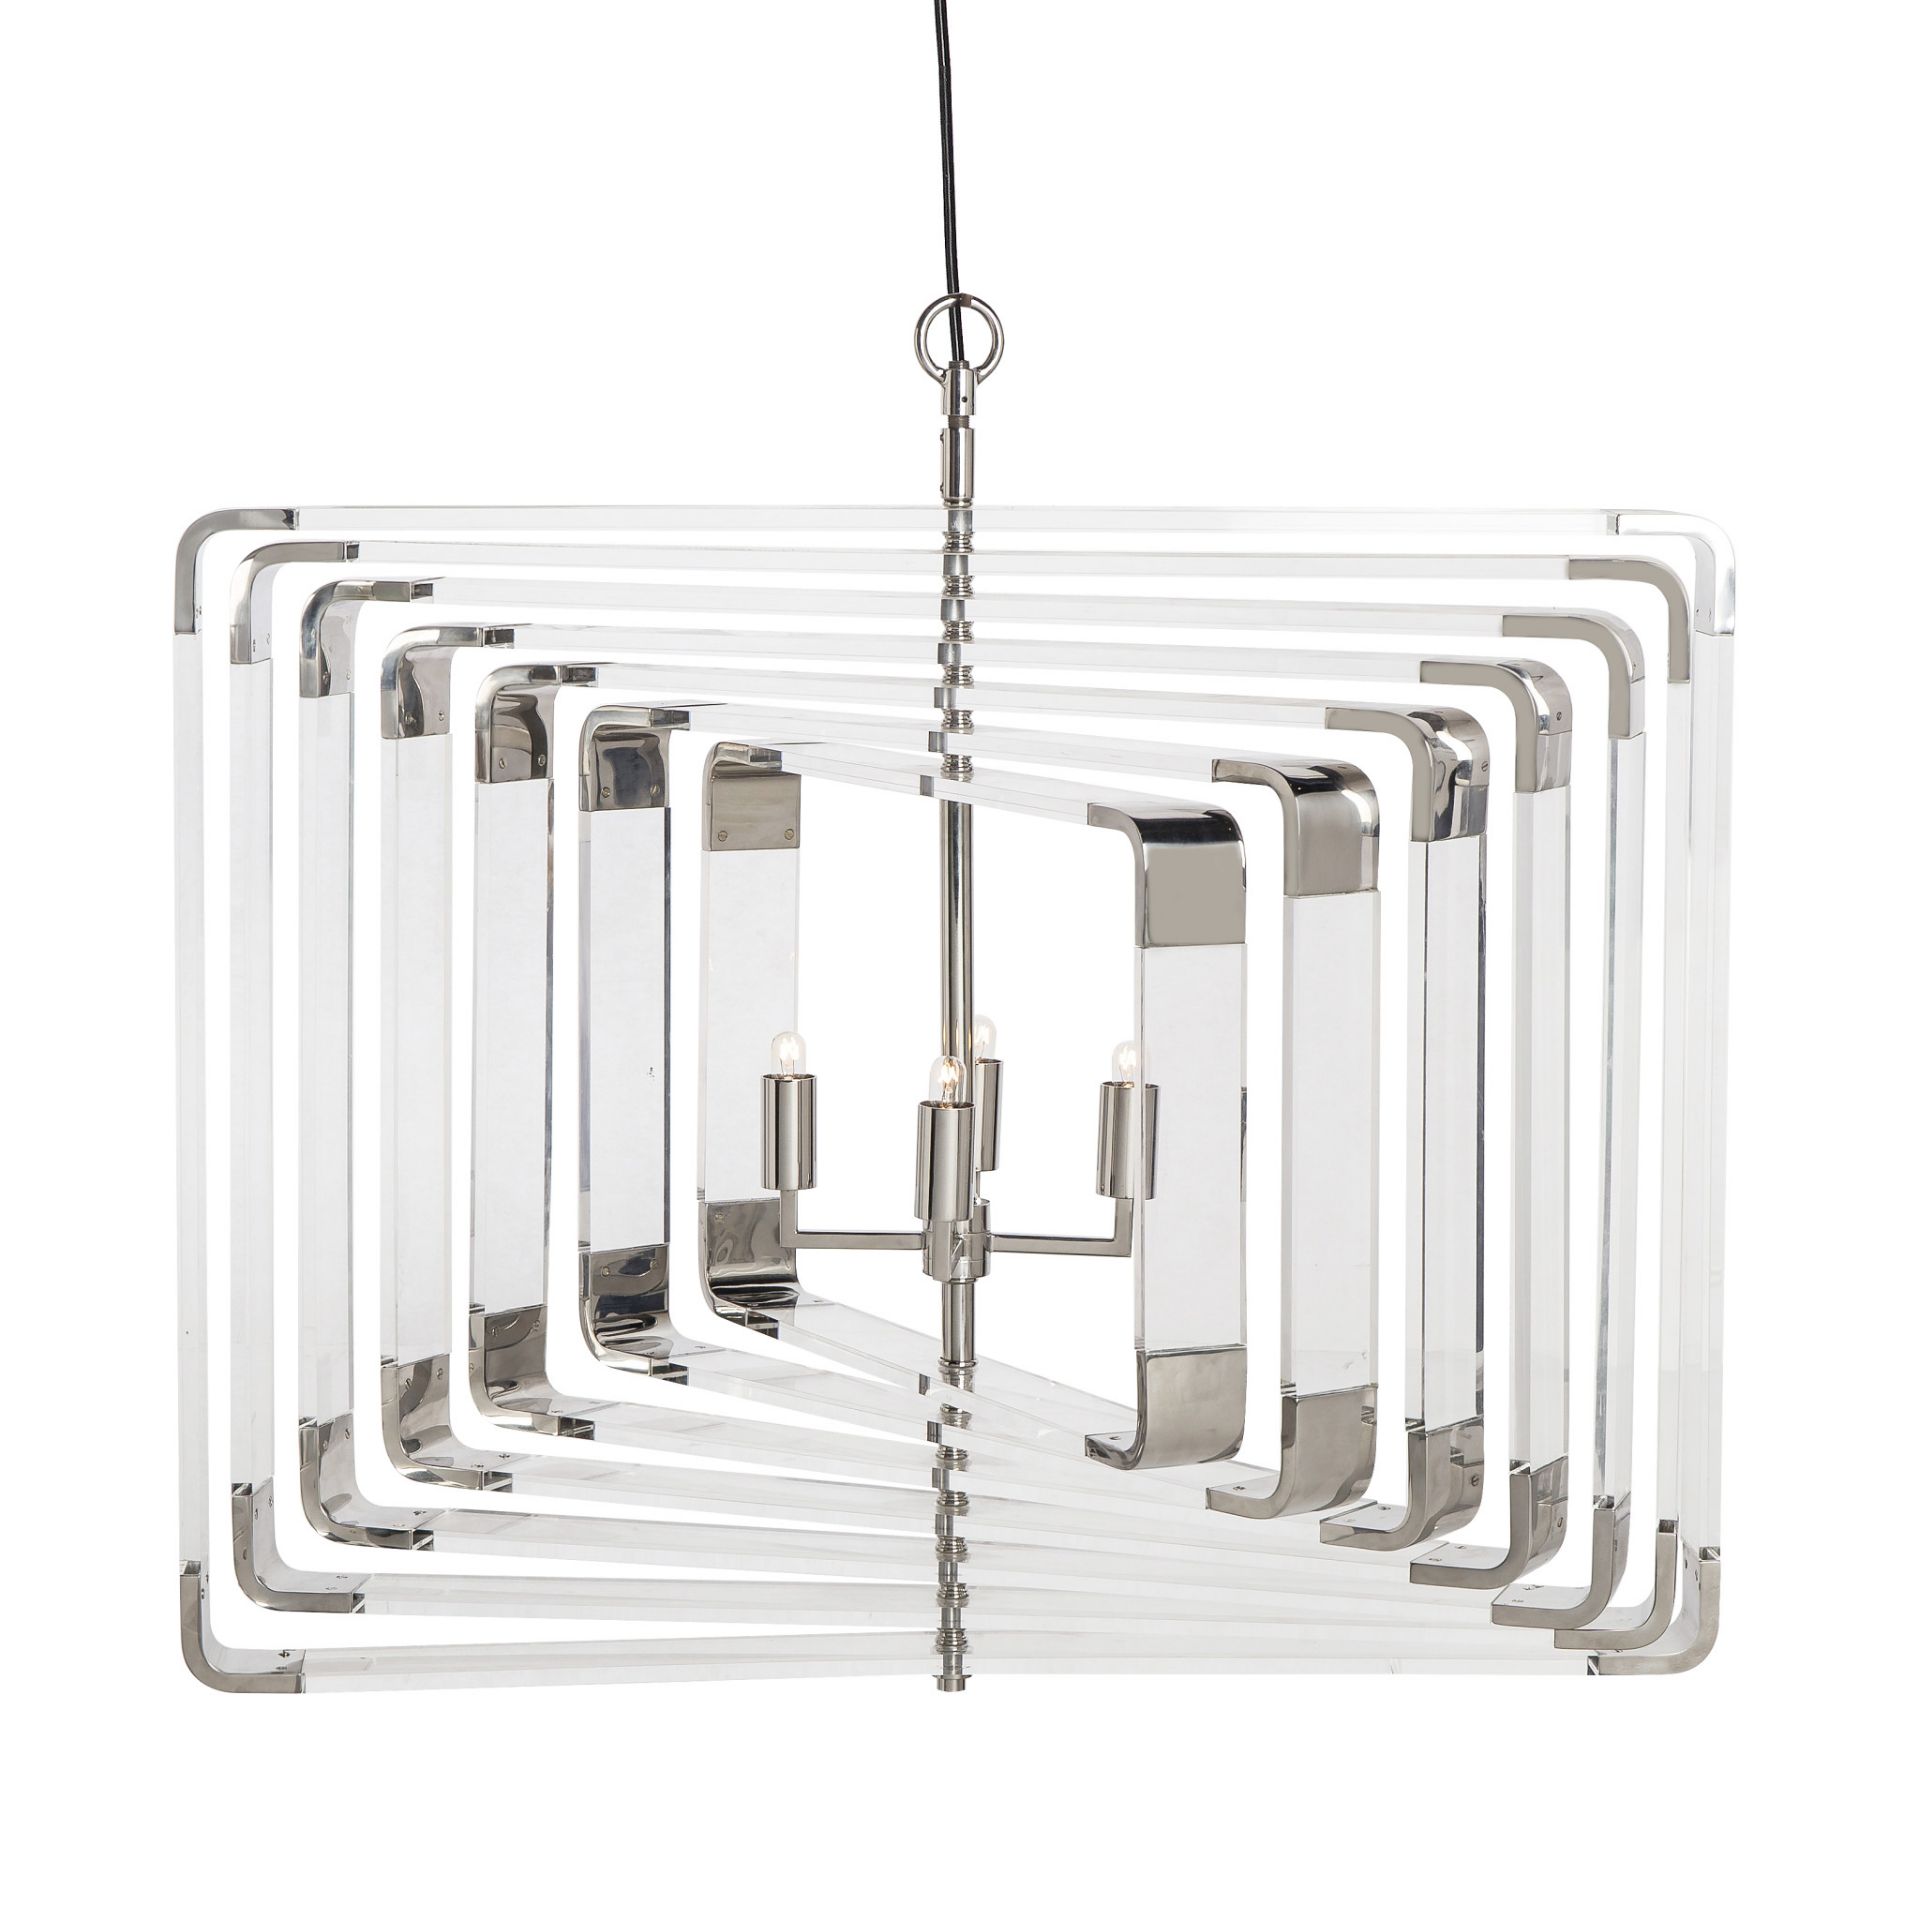 1 x Sonder Living Spiral Acrylic 7-Layer Light With Nickel Finish - New Boxed Stock - Ref: FG1007211 - Image 5 of 6